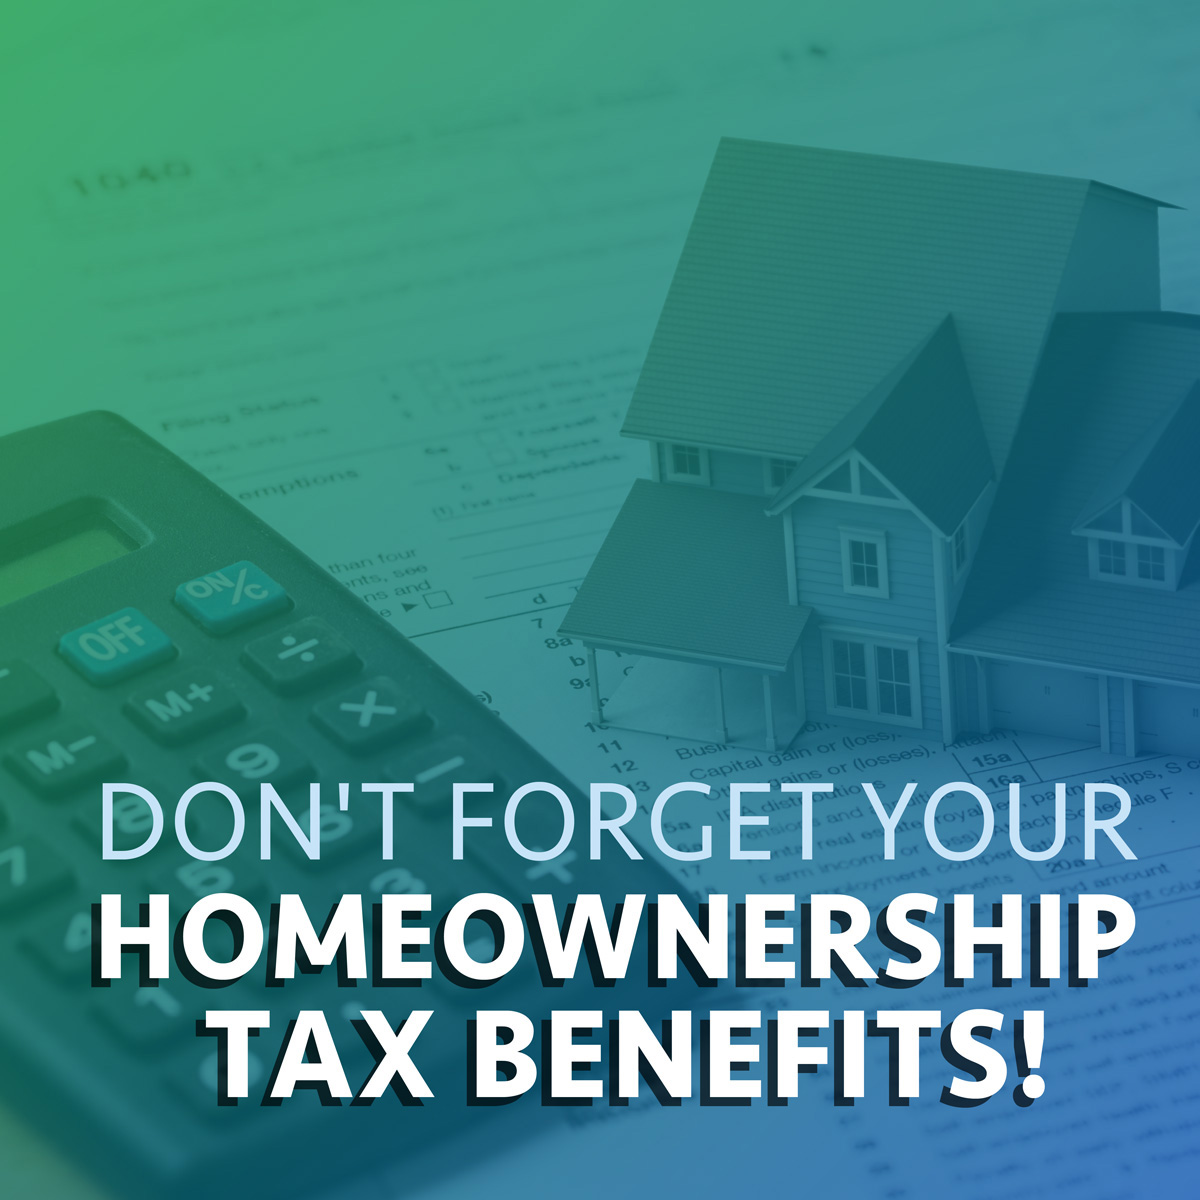 Did you know that owning a home can come with major tax benefits? From deductions on mortgage interest to real estate taxes, buying a home could be a smarter financial move than you think. Give us a call! 🏡💰 #TaxAdvantages #HomeownershipBenefits #CallUsToday